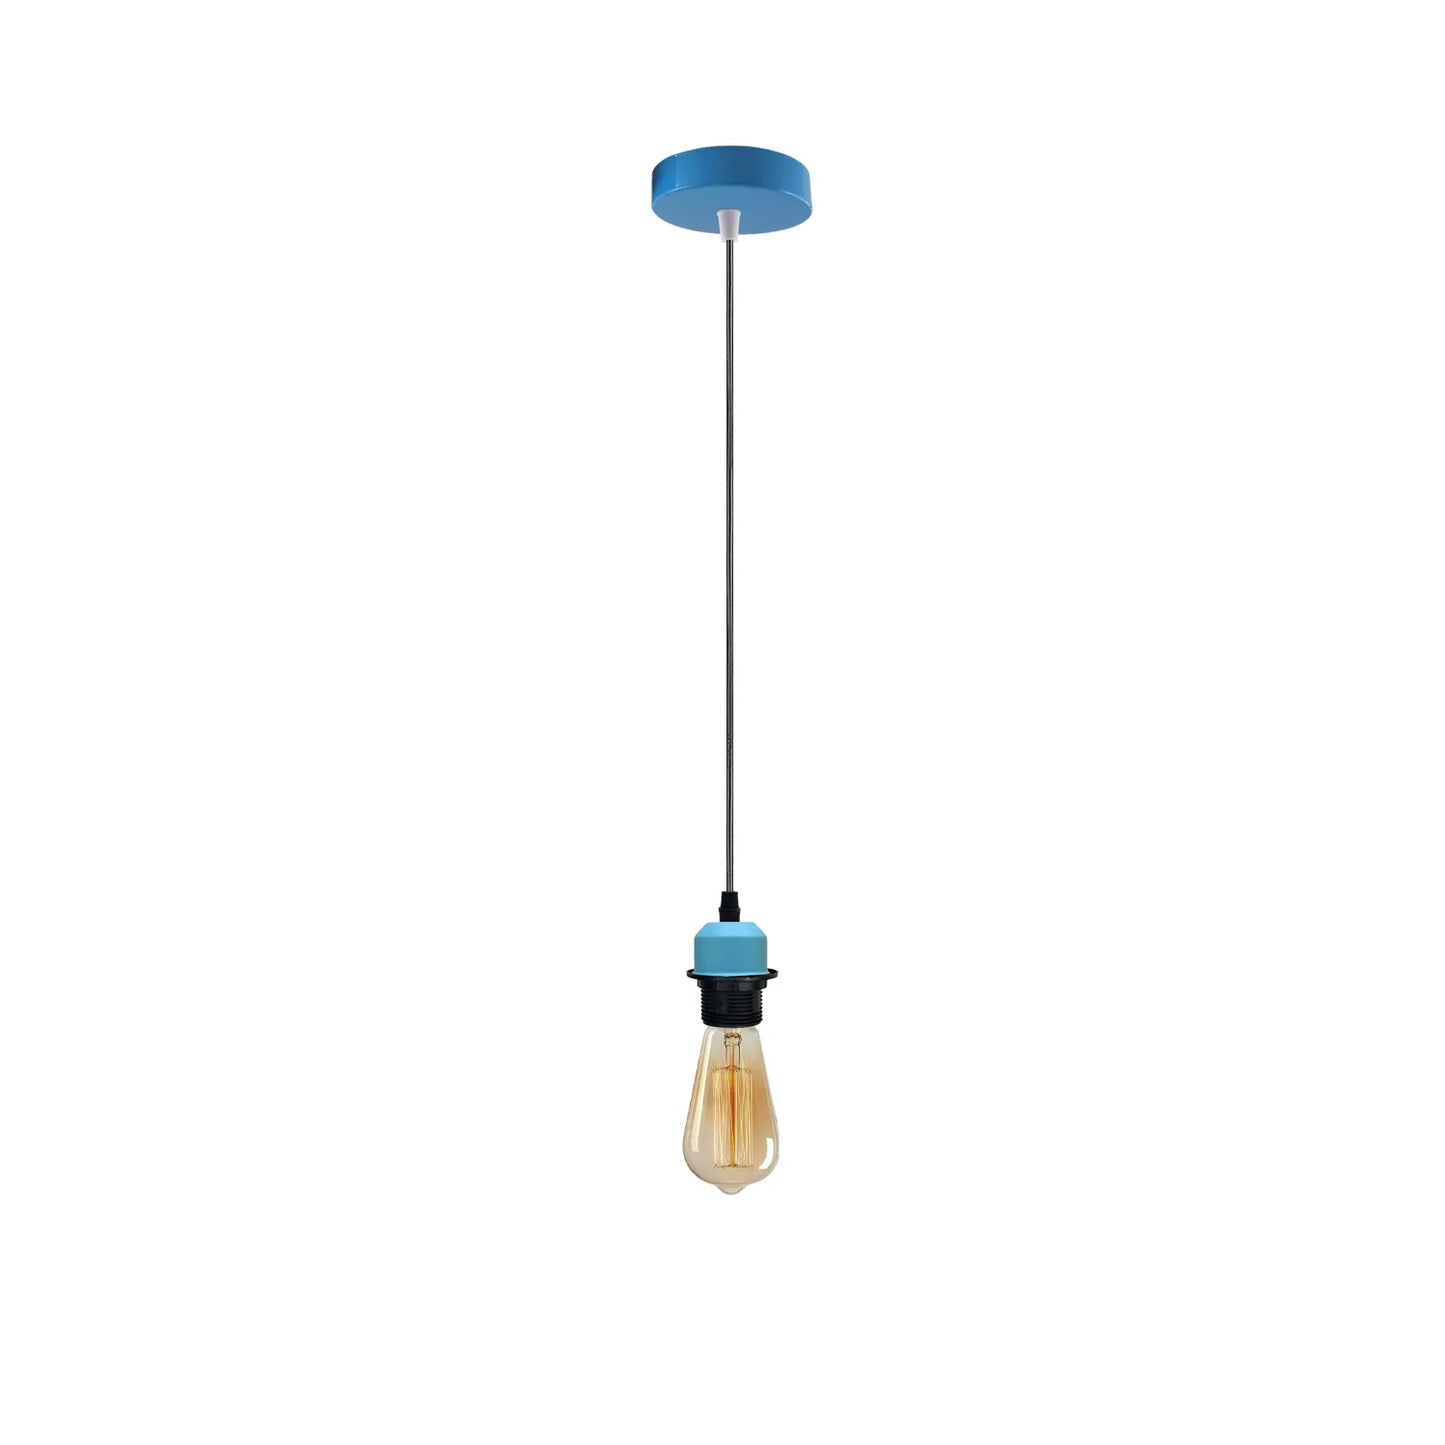 Blue Pendant Lamp Holder - A Stylish and Functional Lighting Fixture for Your Space